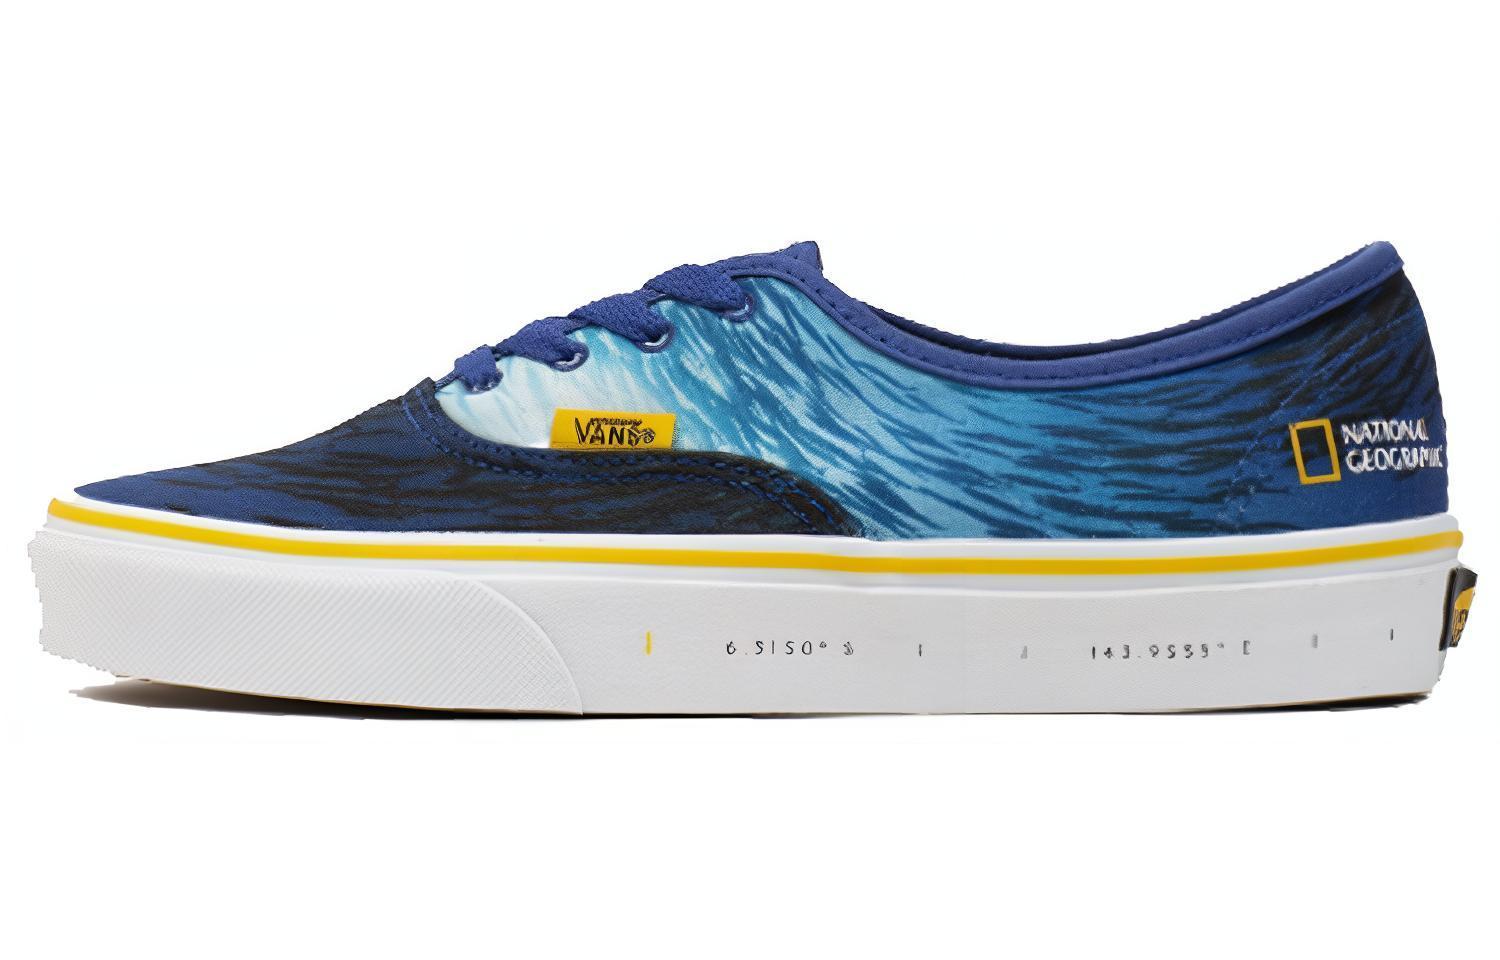 NATIONAL GEOGRAPHIC x Vans Authentic